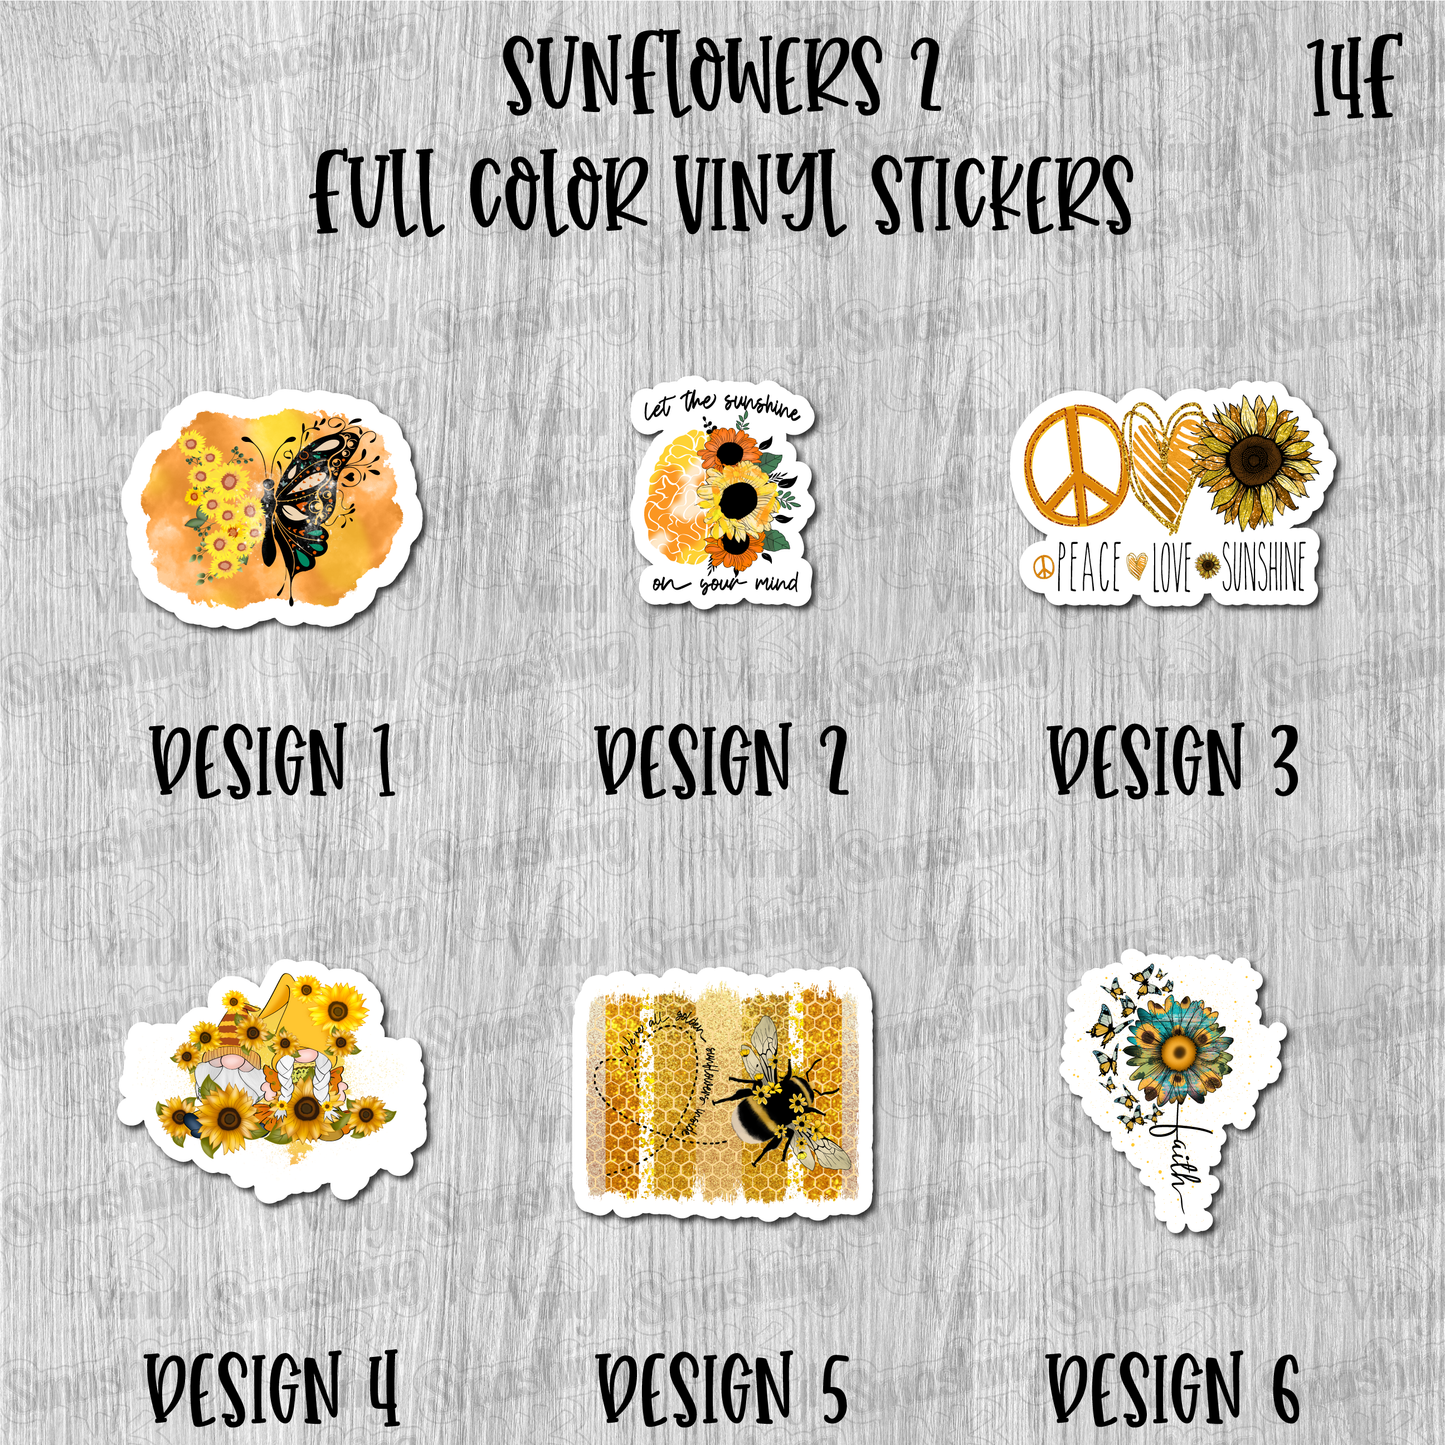 Sunflowers 2 - Full Color Vinyl Stickers (SHIPS IN 3-7 BUS DAYS)